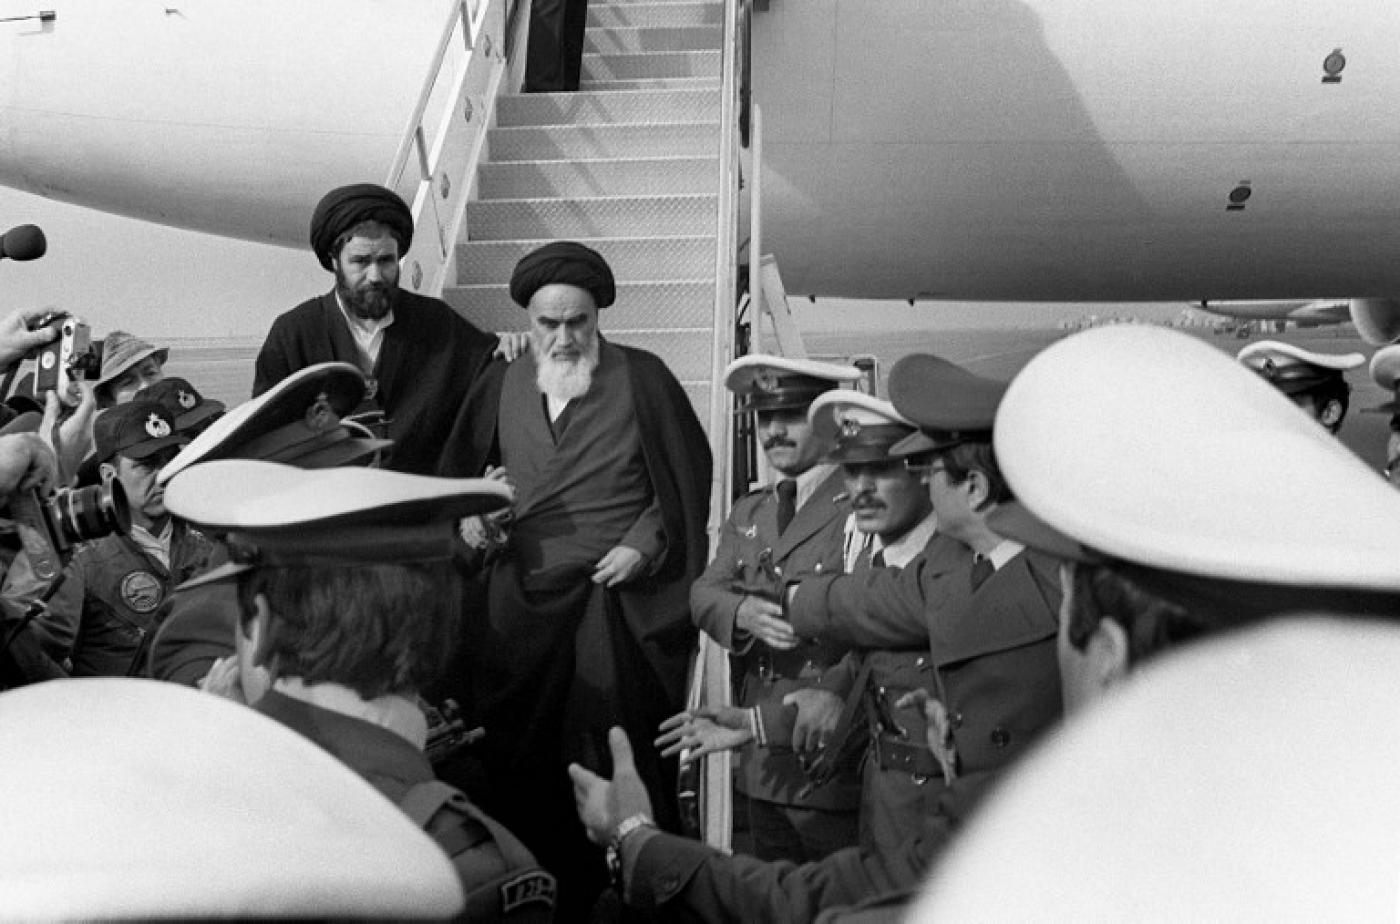 The Ayatollah Khomeini arrives in Tehran - but many Iranians went overseas after the 1979 revolution (file)